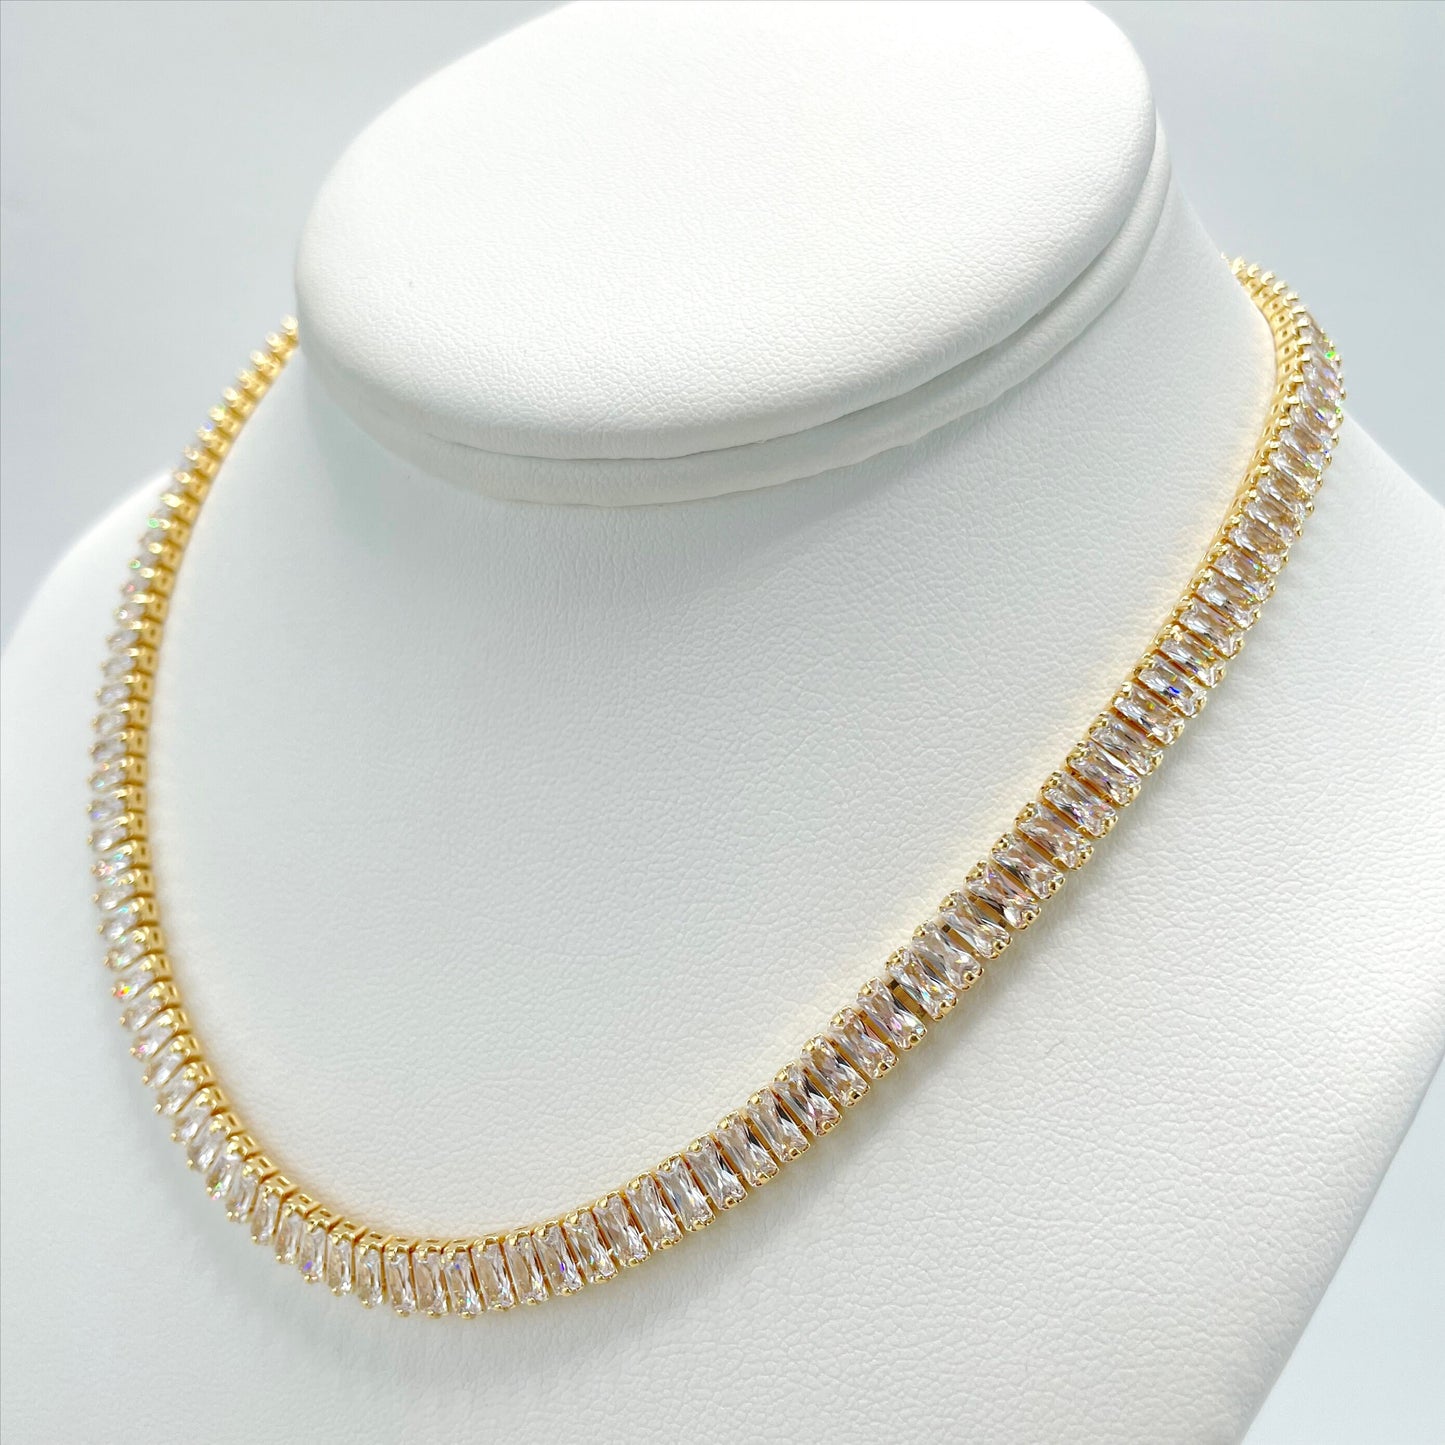 18k Gold Filled Choker or Bracelet Featuring High Quality Clear White Cubic Zirconia Wholesale Jewelry Making Supplies